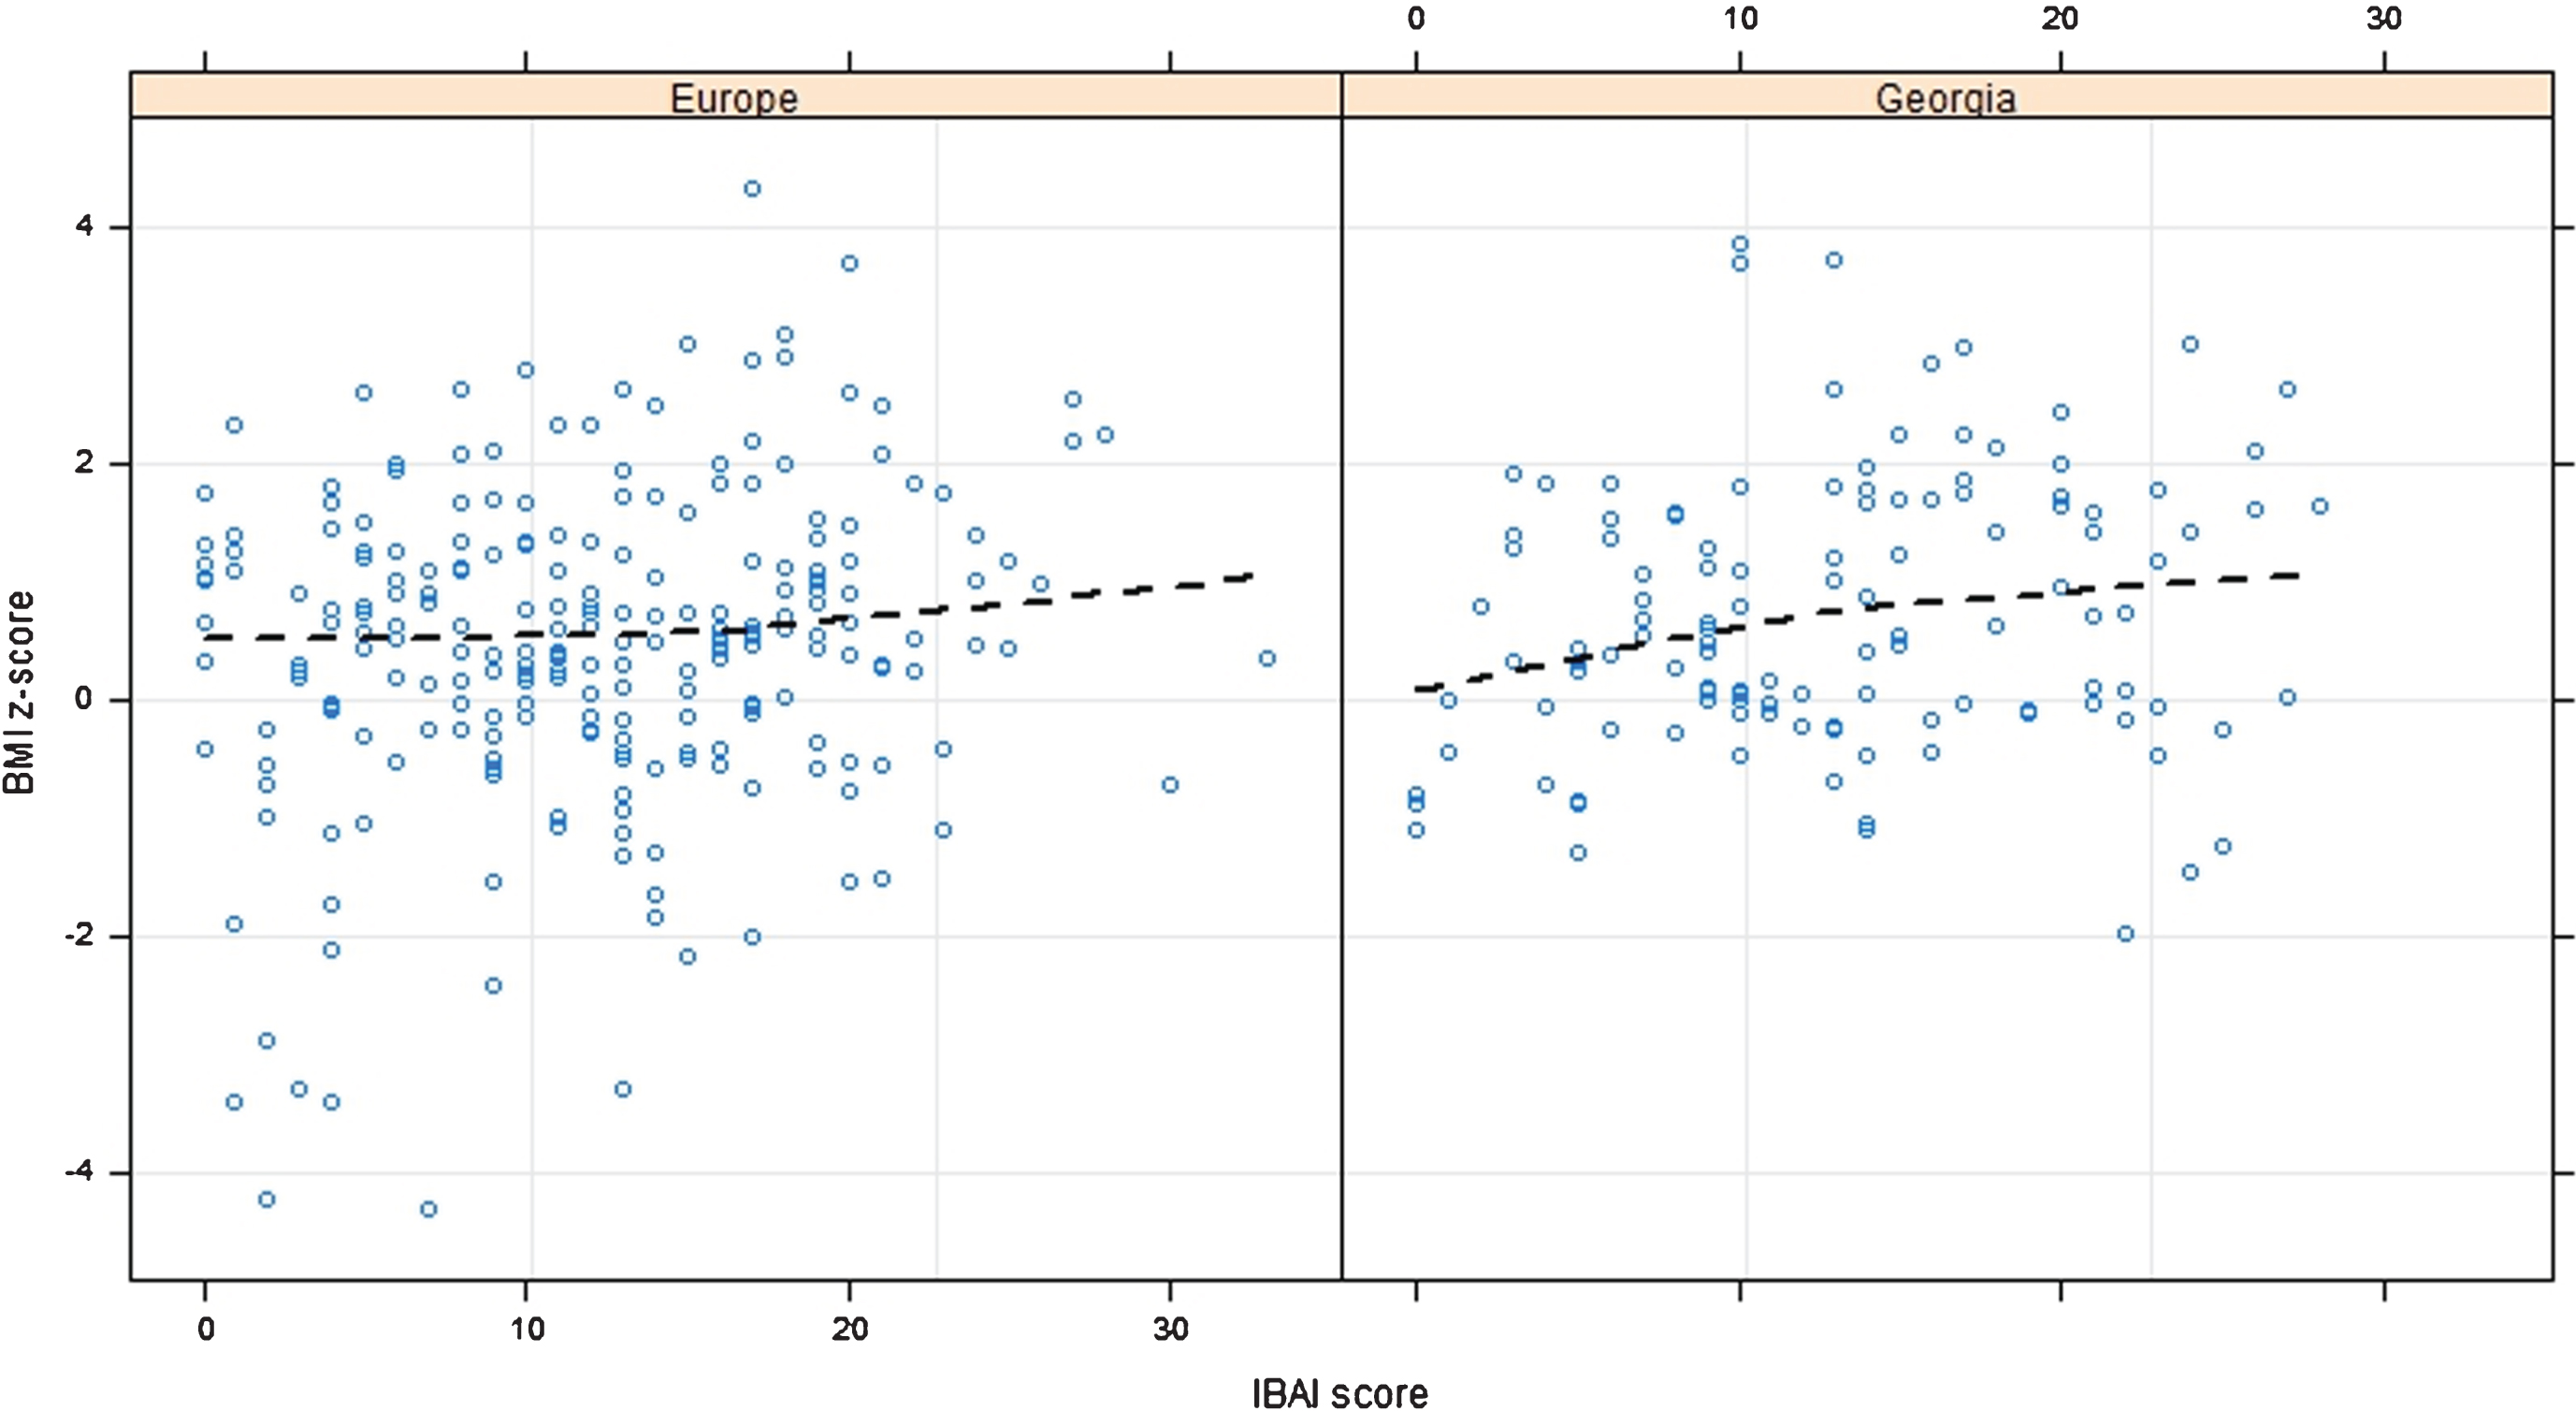 Effect of IBAI score on BMI CDC z-scores among Georgia and Europe. P-value 0.003 for Europe and 0.05 for Georgia.